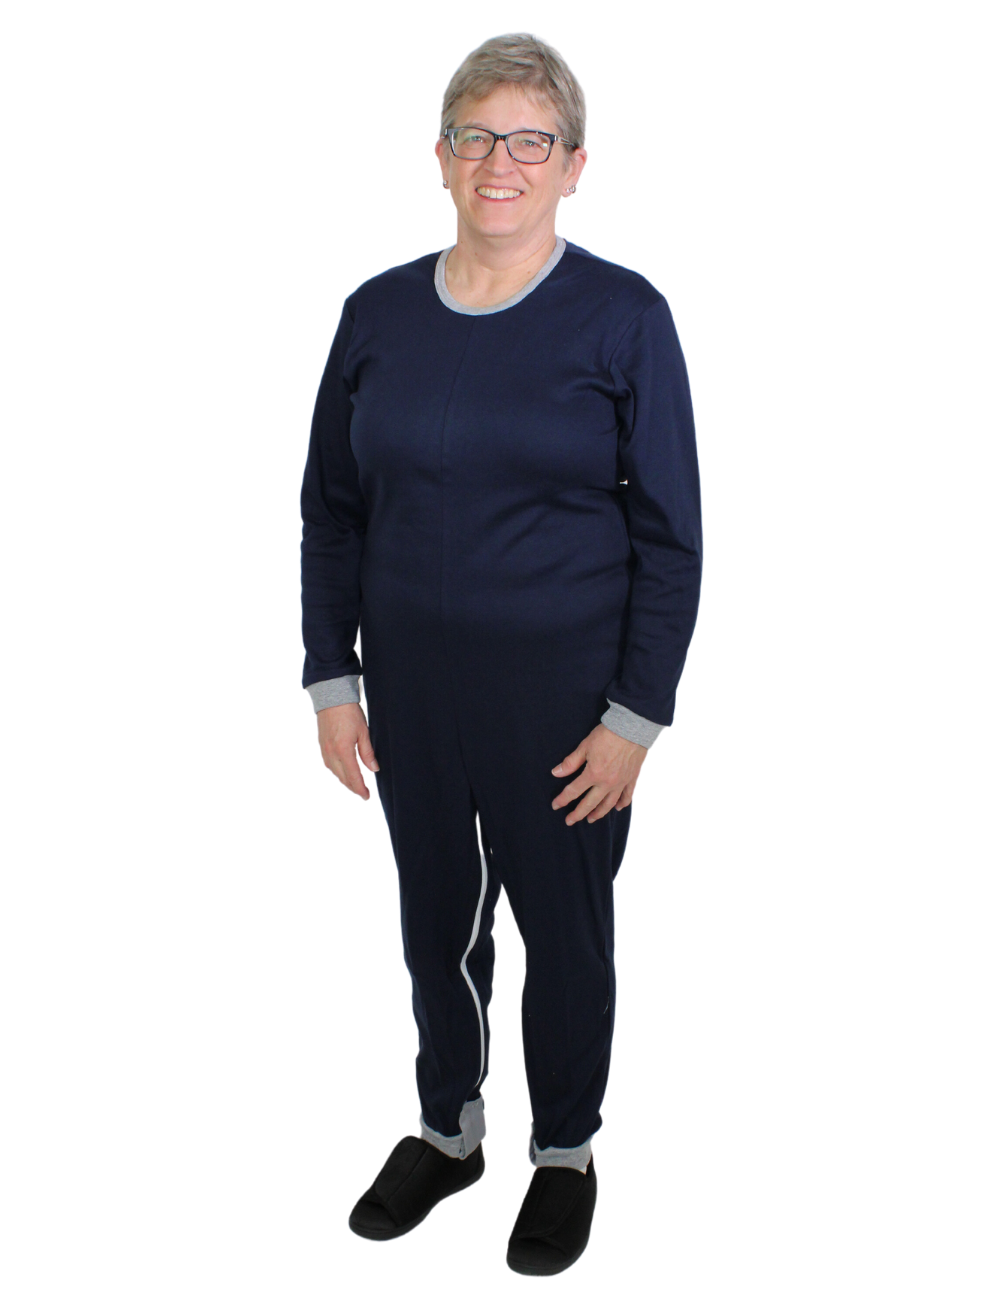 Women's Basic Adaptive Sweatsuit with Collar Adaptive Clothing for